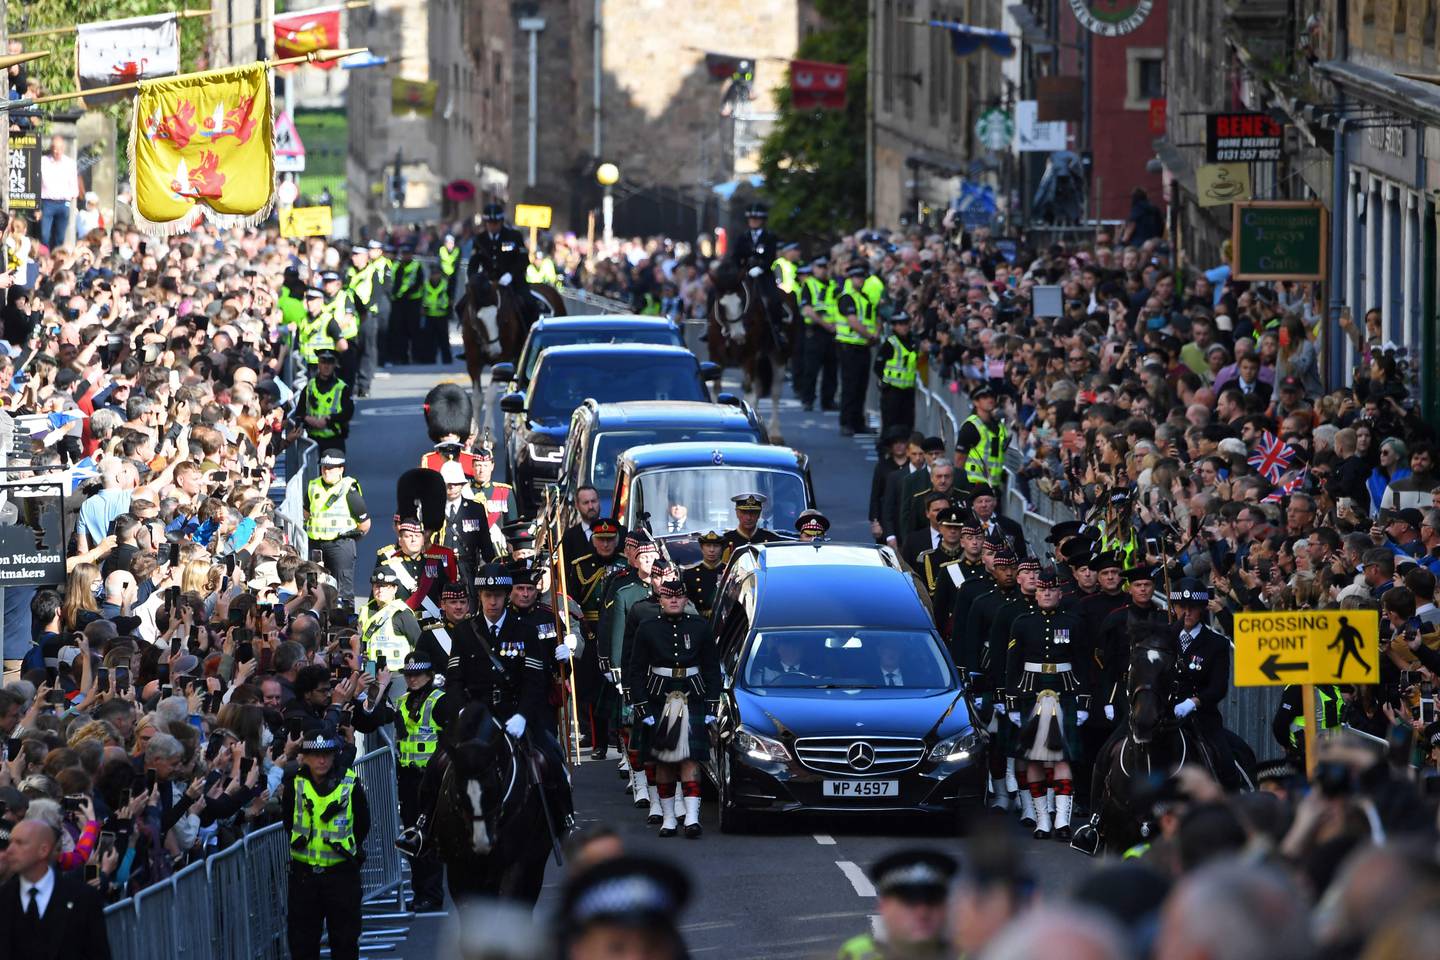 The procession of Queen Elizabeth II's coffin, from the Palace of Holyroodhouse to St Giles’ Cathedral, on the Royal Mile in Edinburgh on Monday. AFP